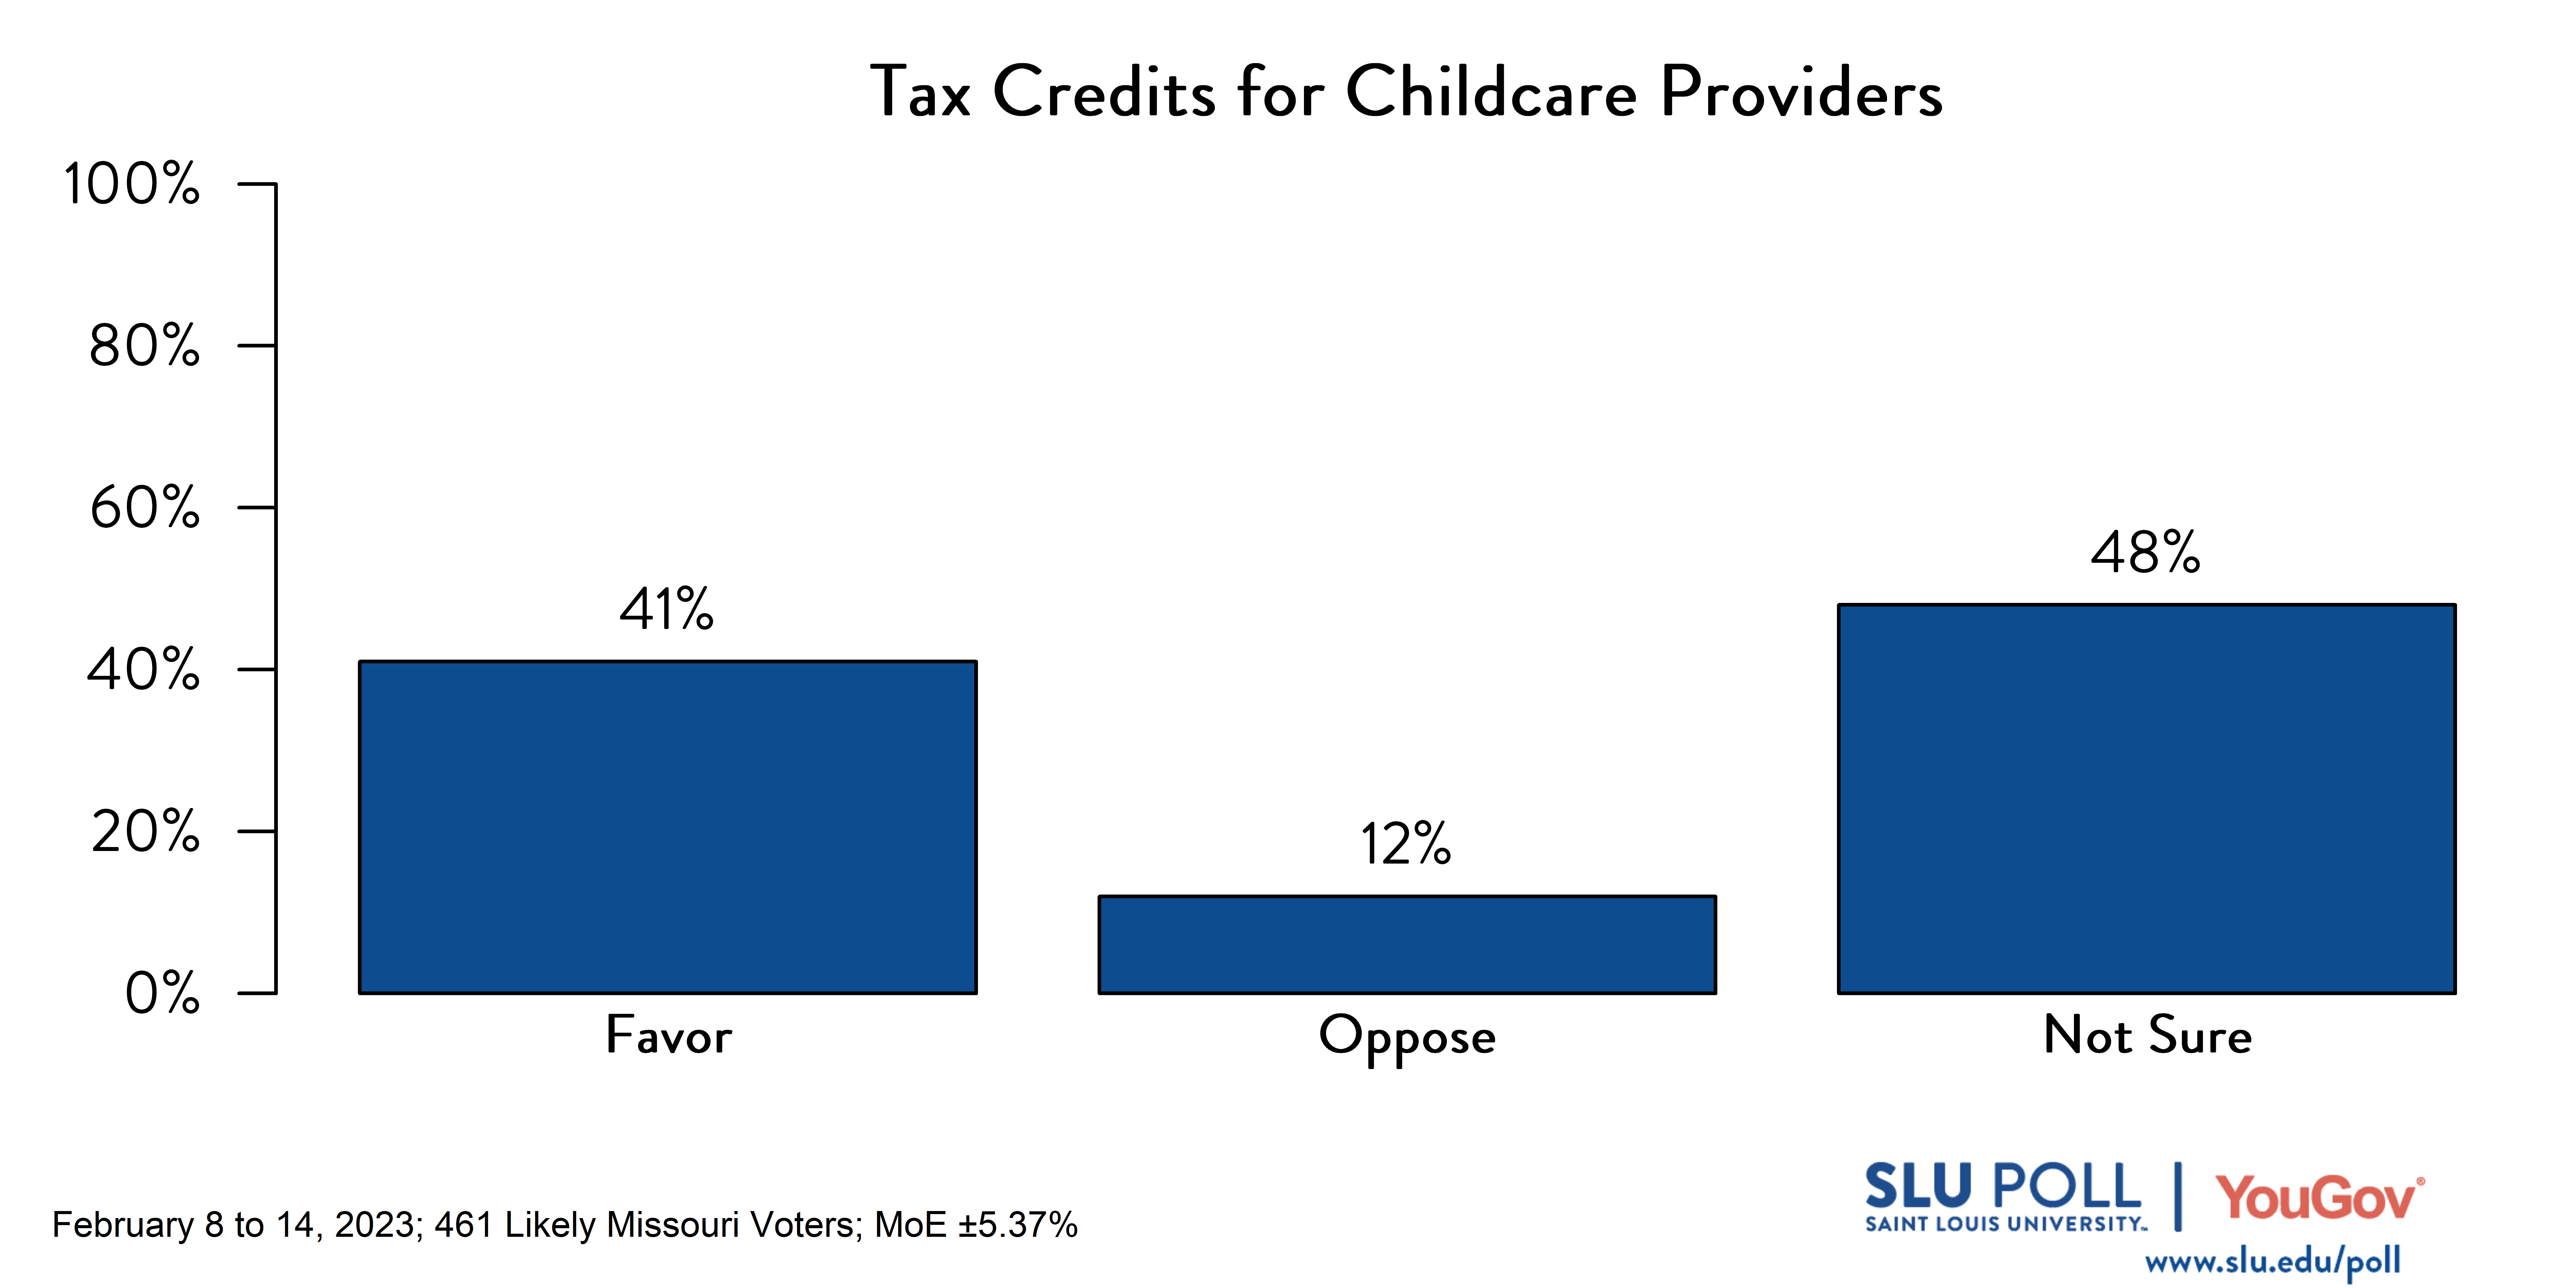 Likely voters' responses to 'Do you favor or oppose the following policies: Childcare providers with at least three employees may claim state credit equal to their employer withholding tax and 30% of their capital expenditures?': 41% Favor, 12% Oppose, and 48% Not sure.